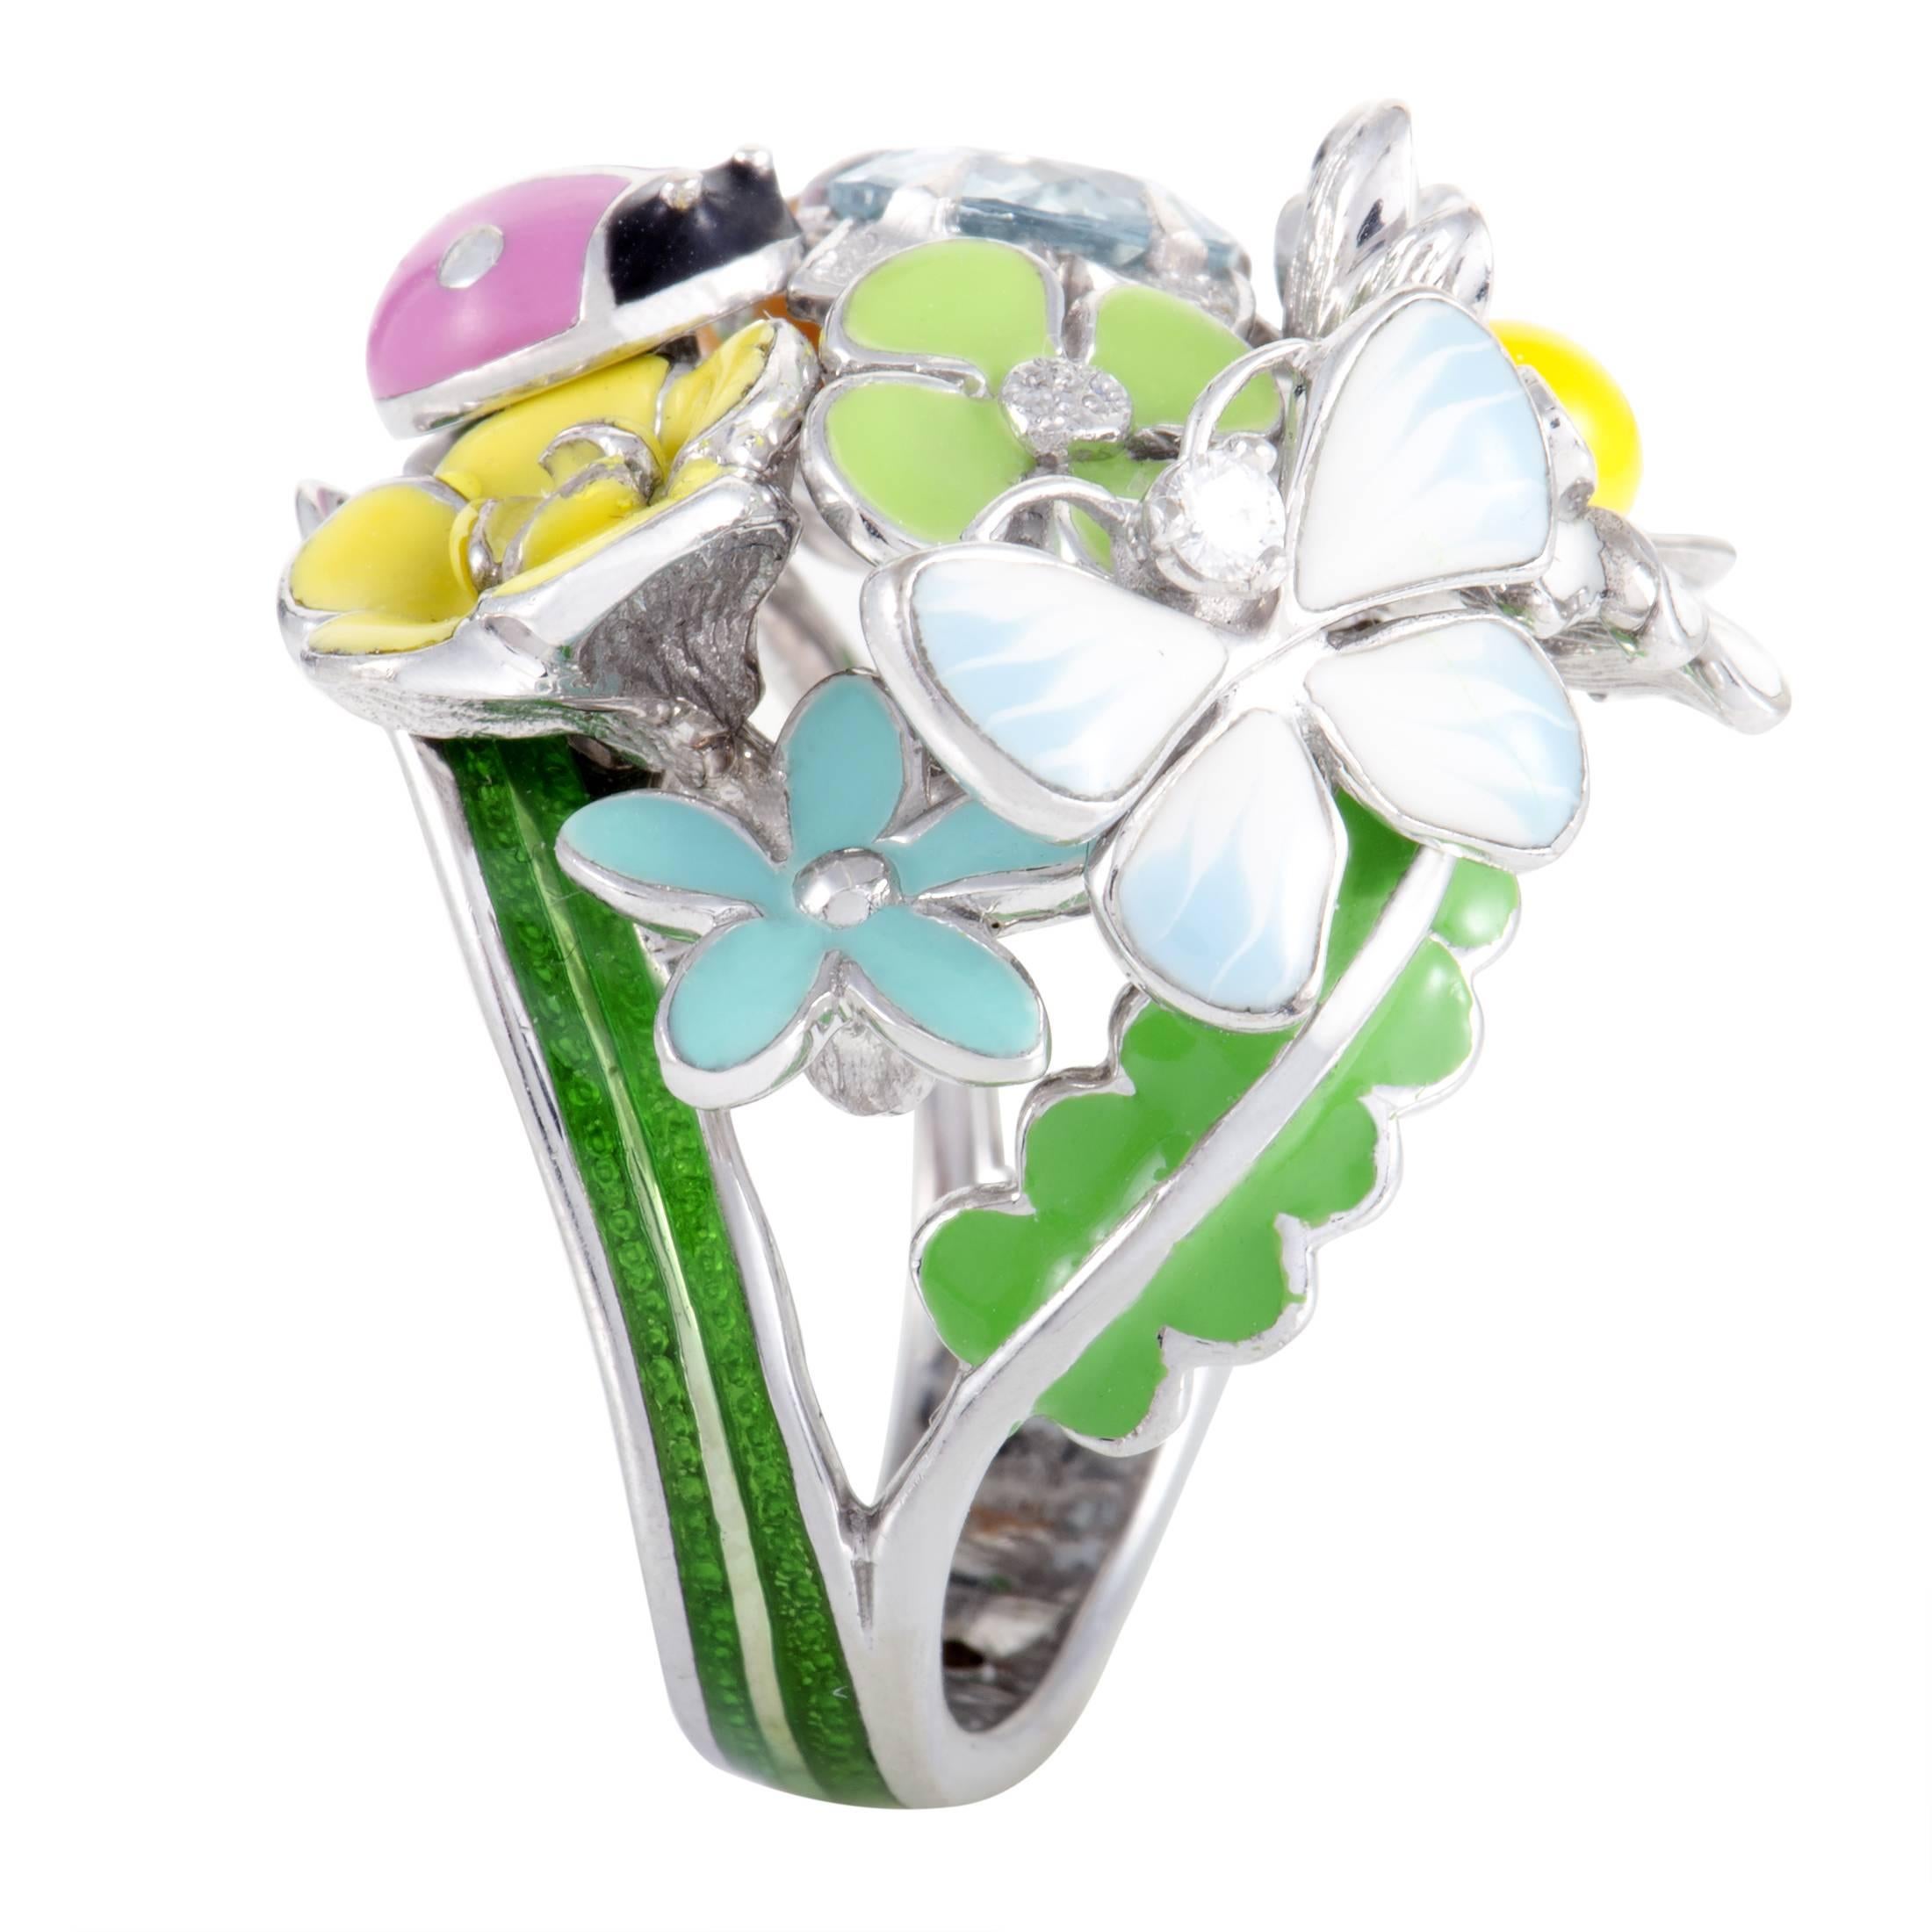 Vivacious, colorful and stylish, this marvelous ring from Dior is made of splendid 18K white gold and embellished with an extraordinary arrangement of diverse enameled decorations along with bright aquamarine glisten and 0.04ct of diamond